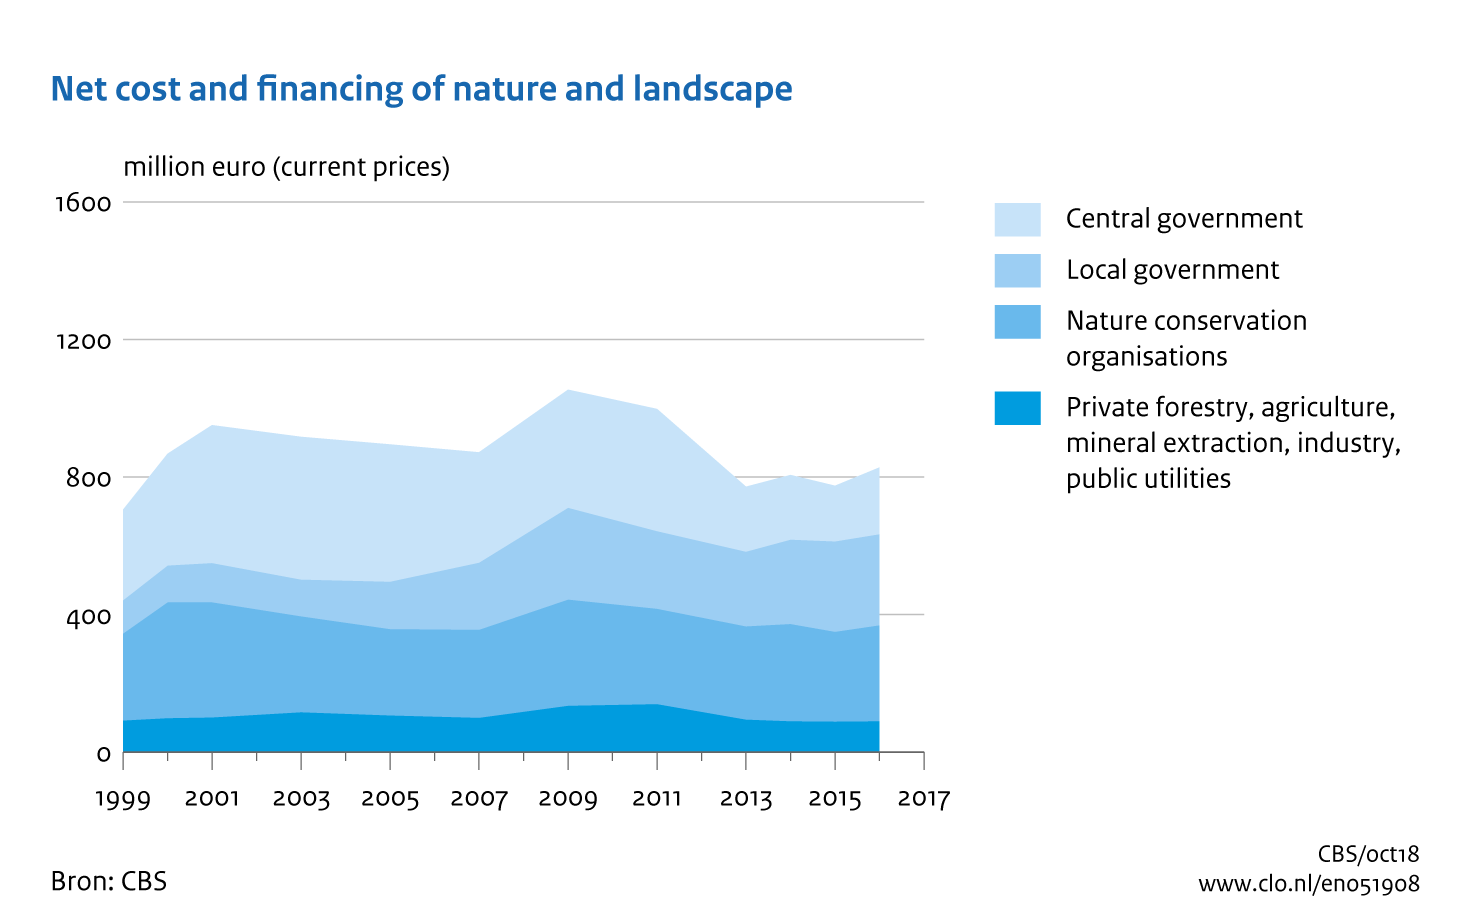 Image Net cost and financing of nature and landscape. The image is further explained in the text.